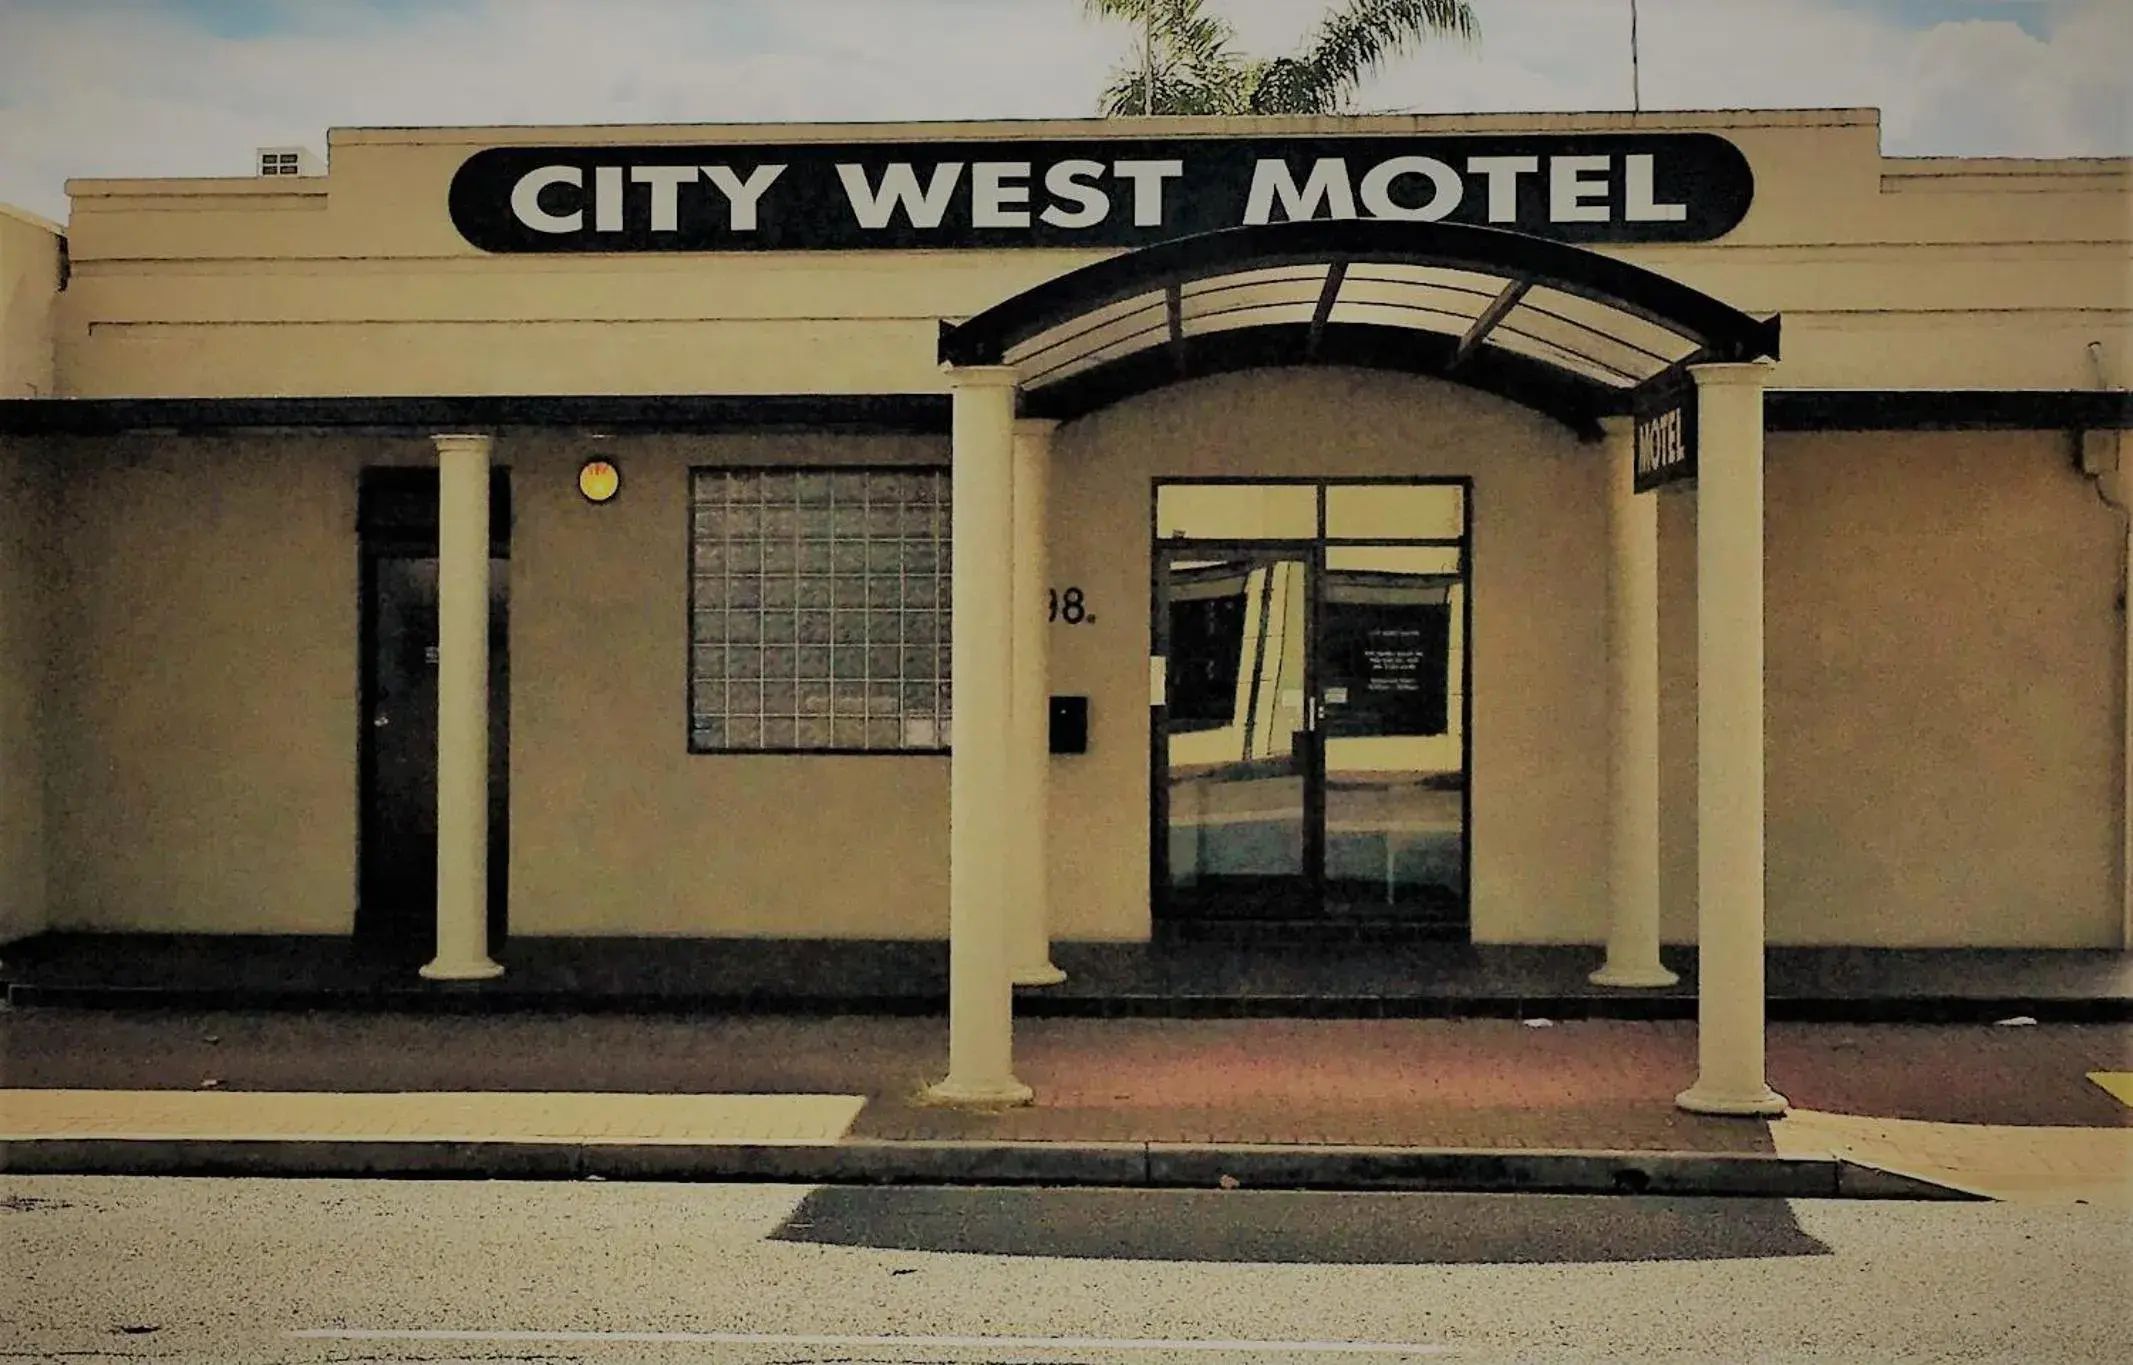 Property building in City West Motel